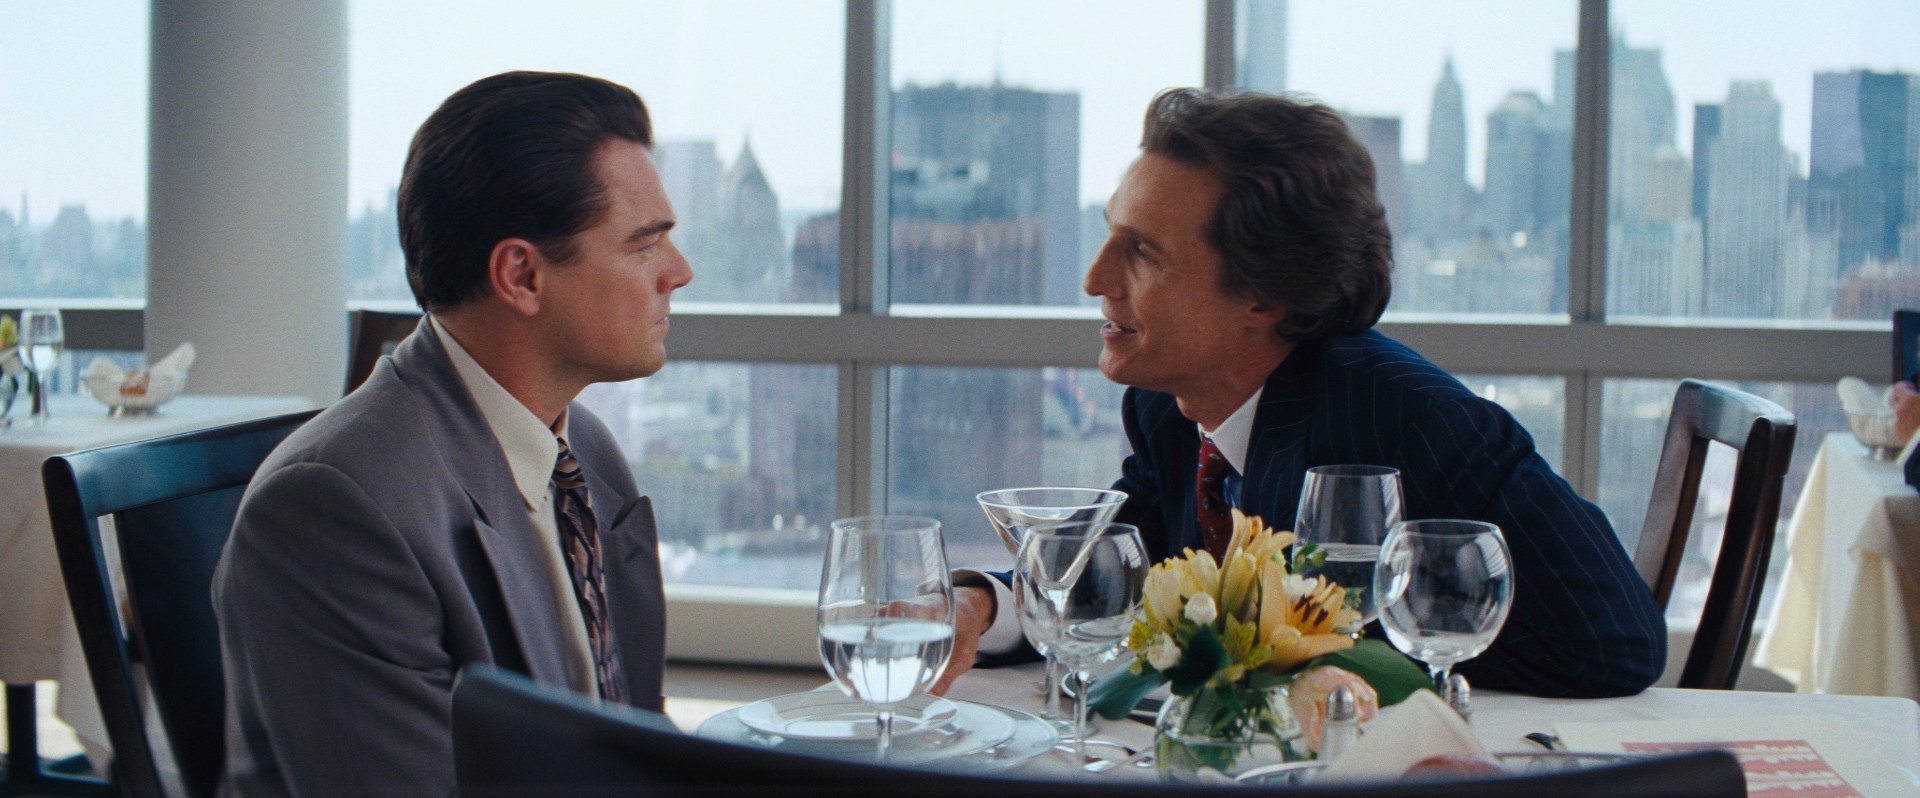 Leonardo DiCaprio stars as Jordan Belfort and Matthew McConaughey stars as Mark Hanna in Paramount Pictures' The Wolf of Wall Street (2013)